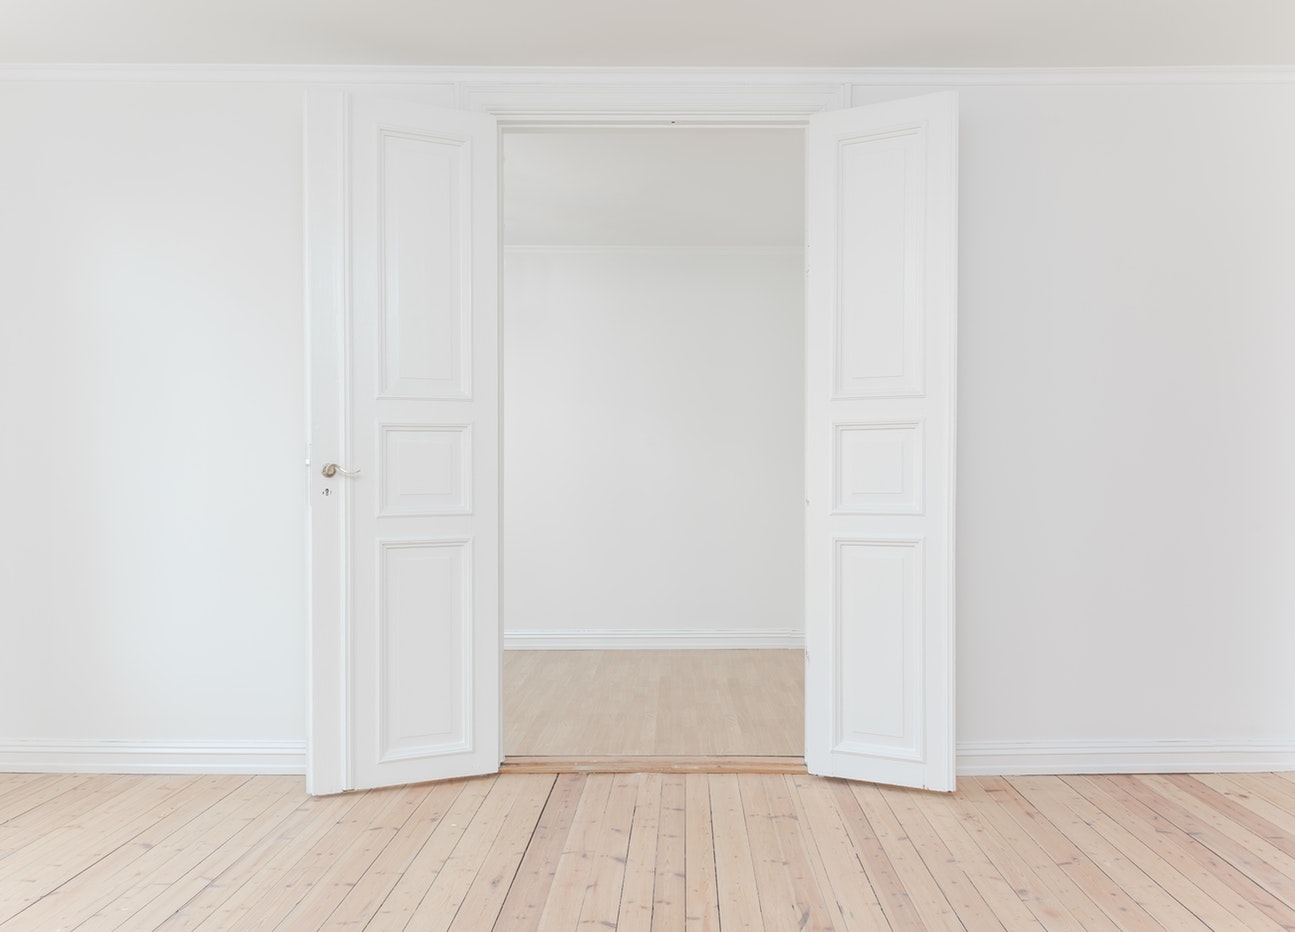 A white door is opening to an empty room